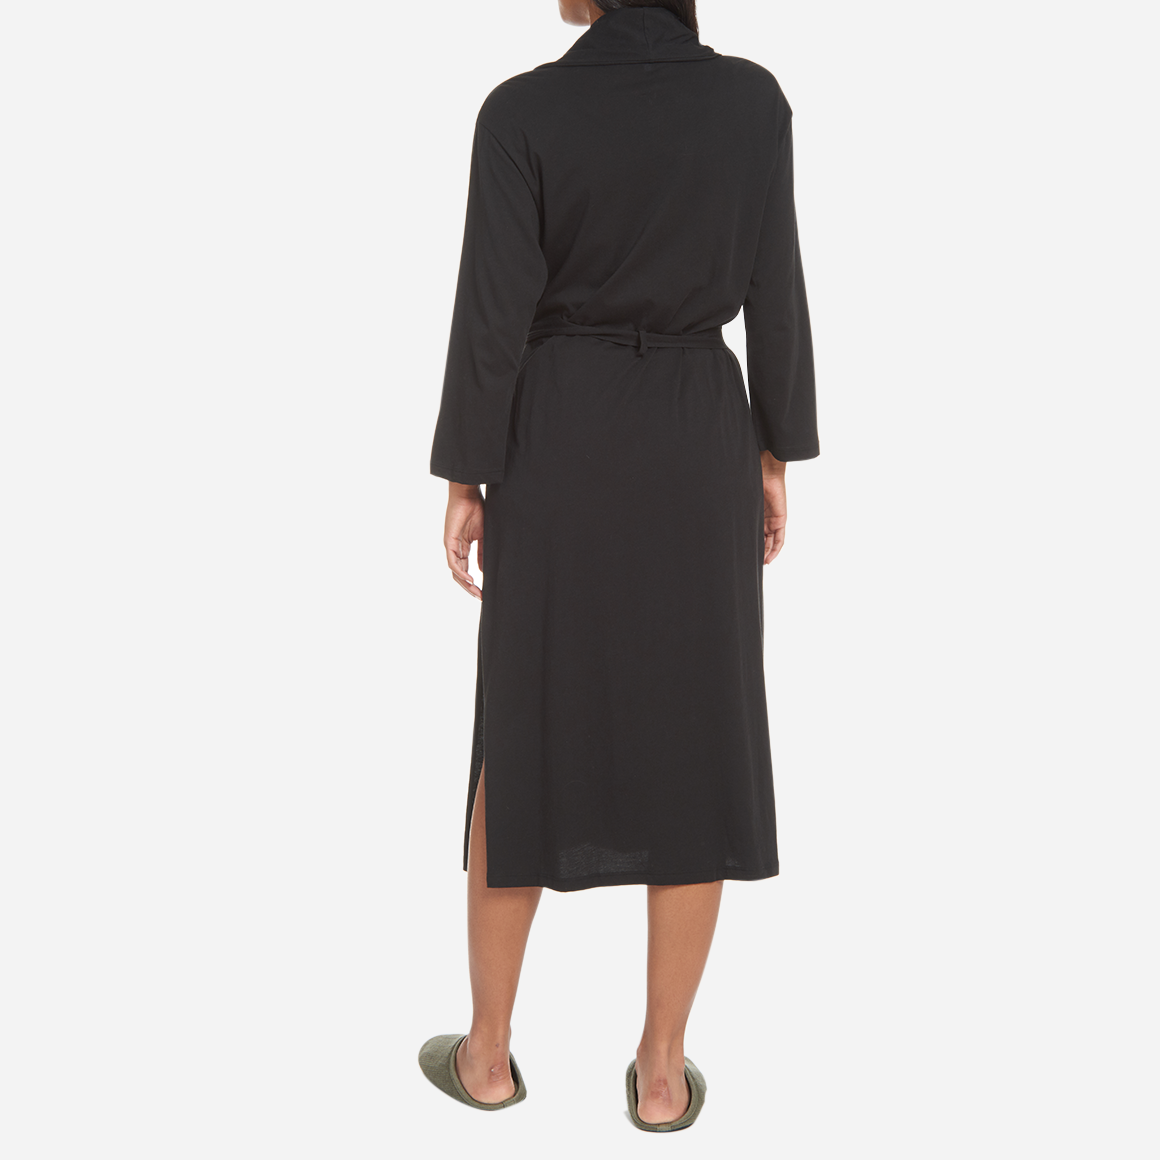 The Carina Robe features a relaxed fit with a detachable belt and pockets for added convenience. The breathable cotton fibers are designed to keep you cool and cozy as you unwind or go about your bedtime routine.